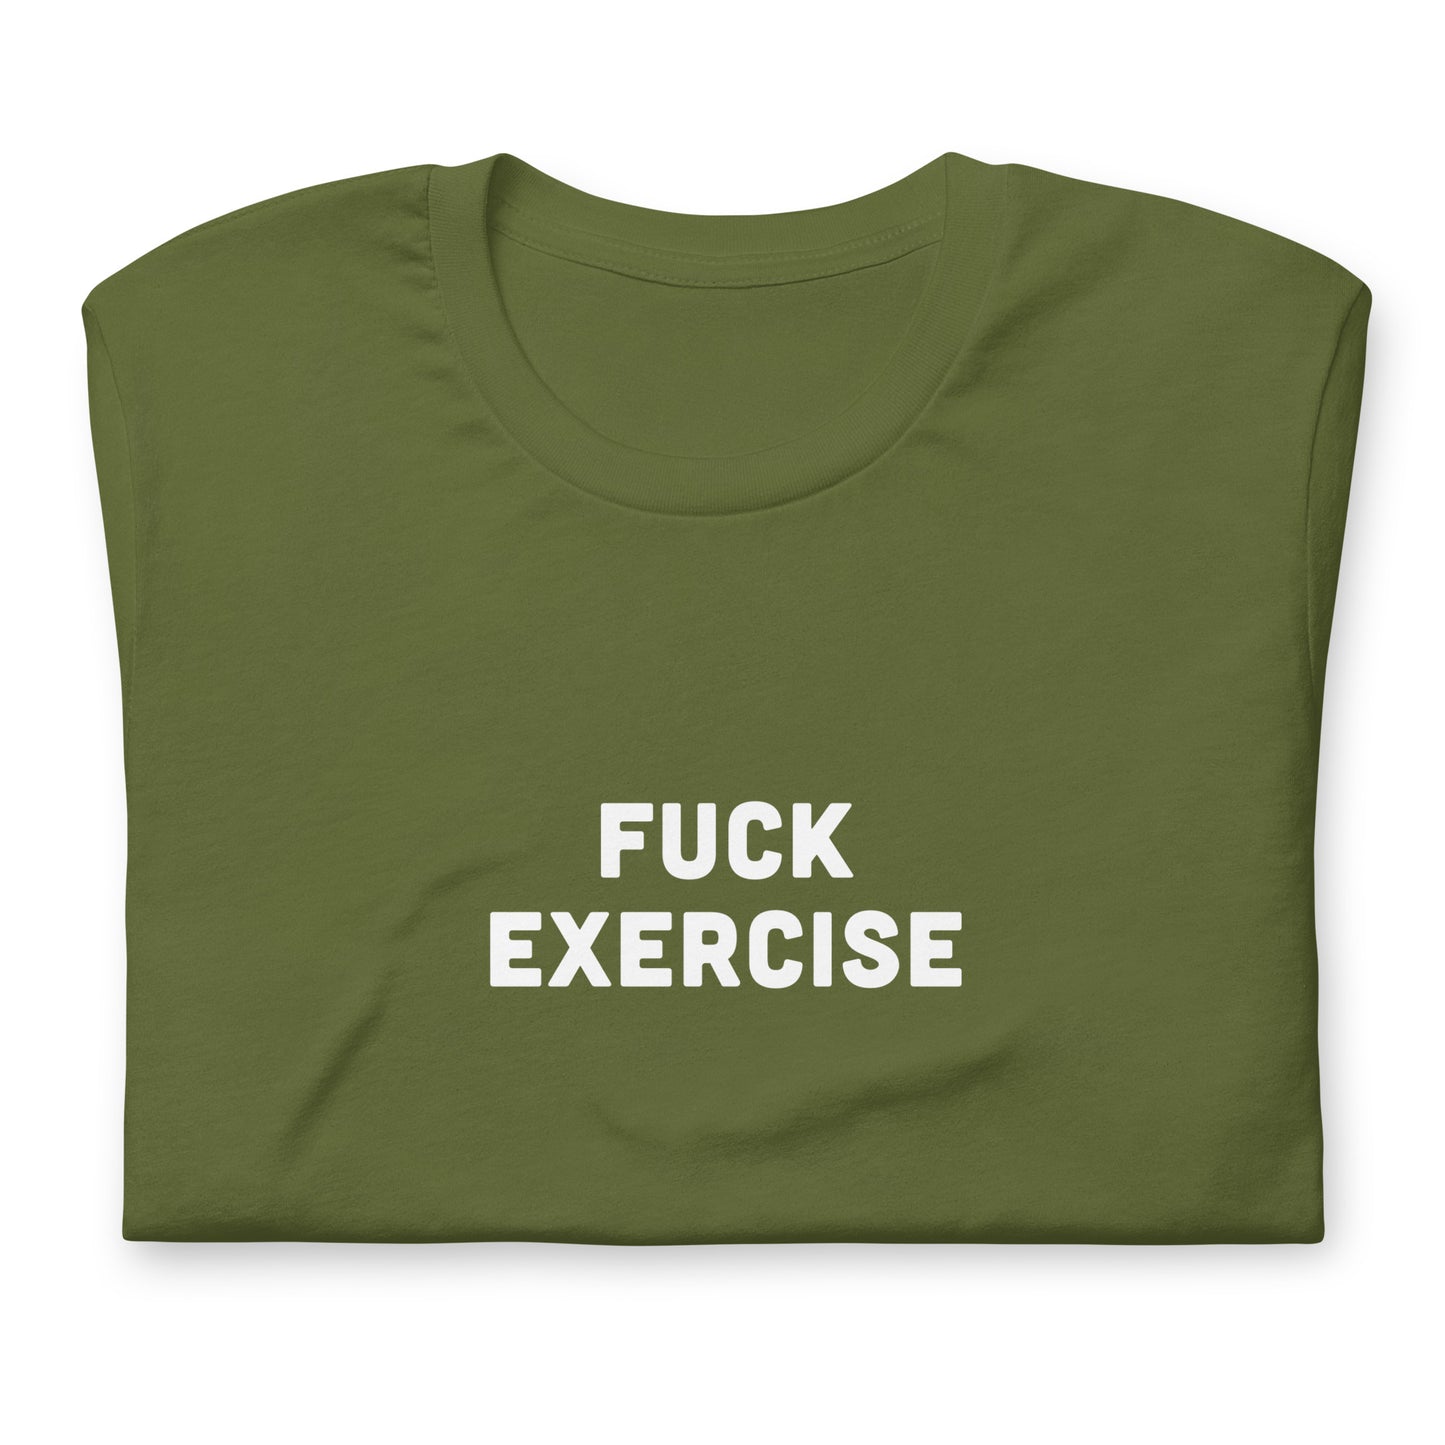 Fuck Exercise T-Shirt Size S Color Navy